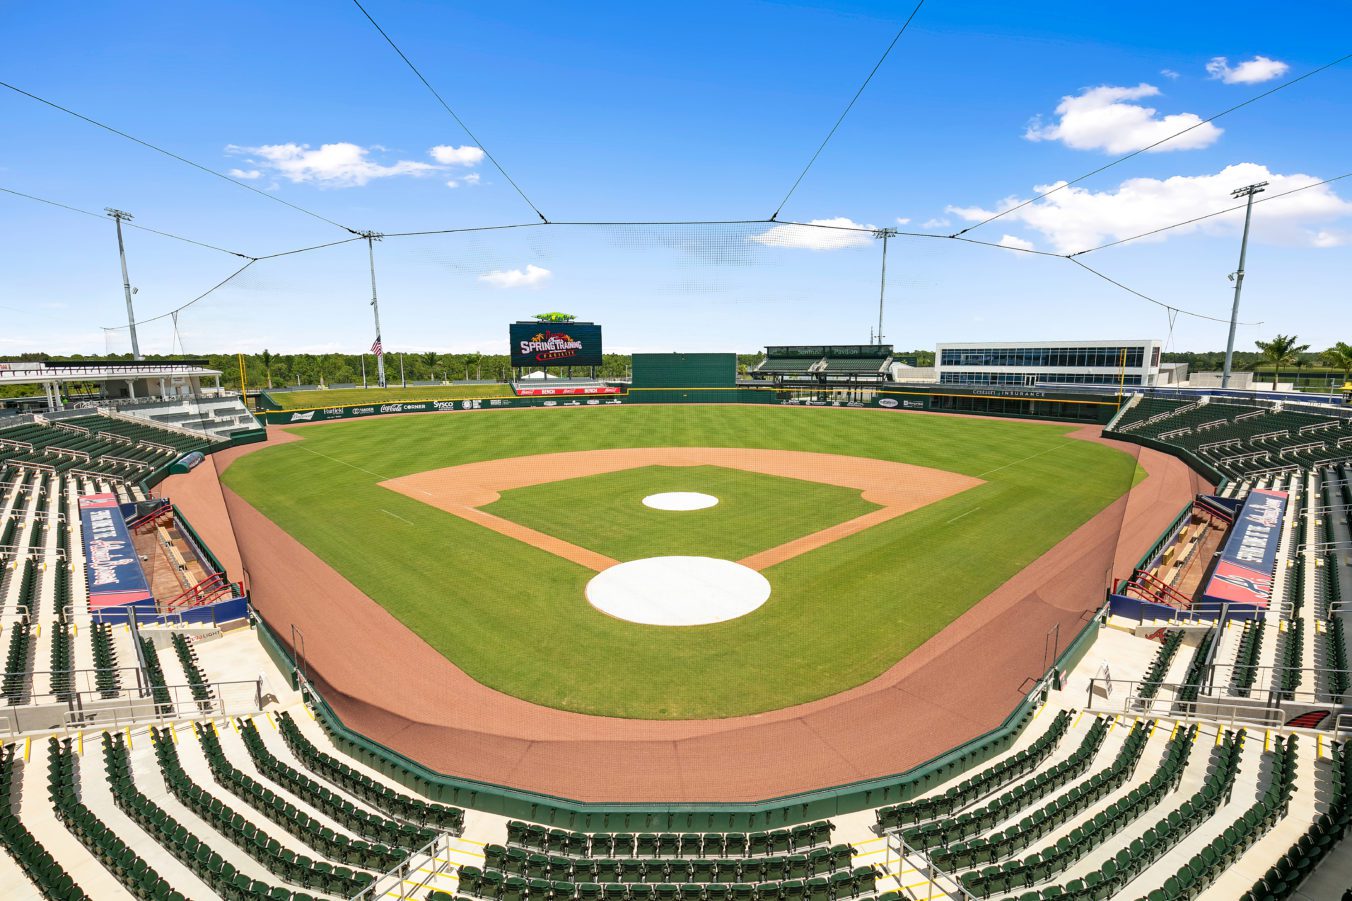 A view of the Atlanta Braves Spring Training stadium CoolToday Park from behind home plate